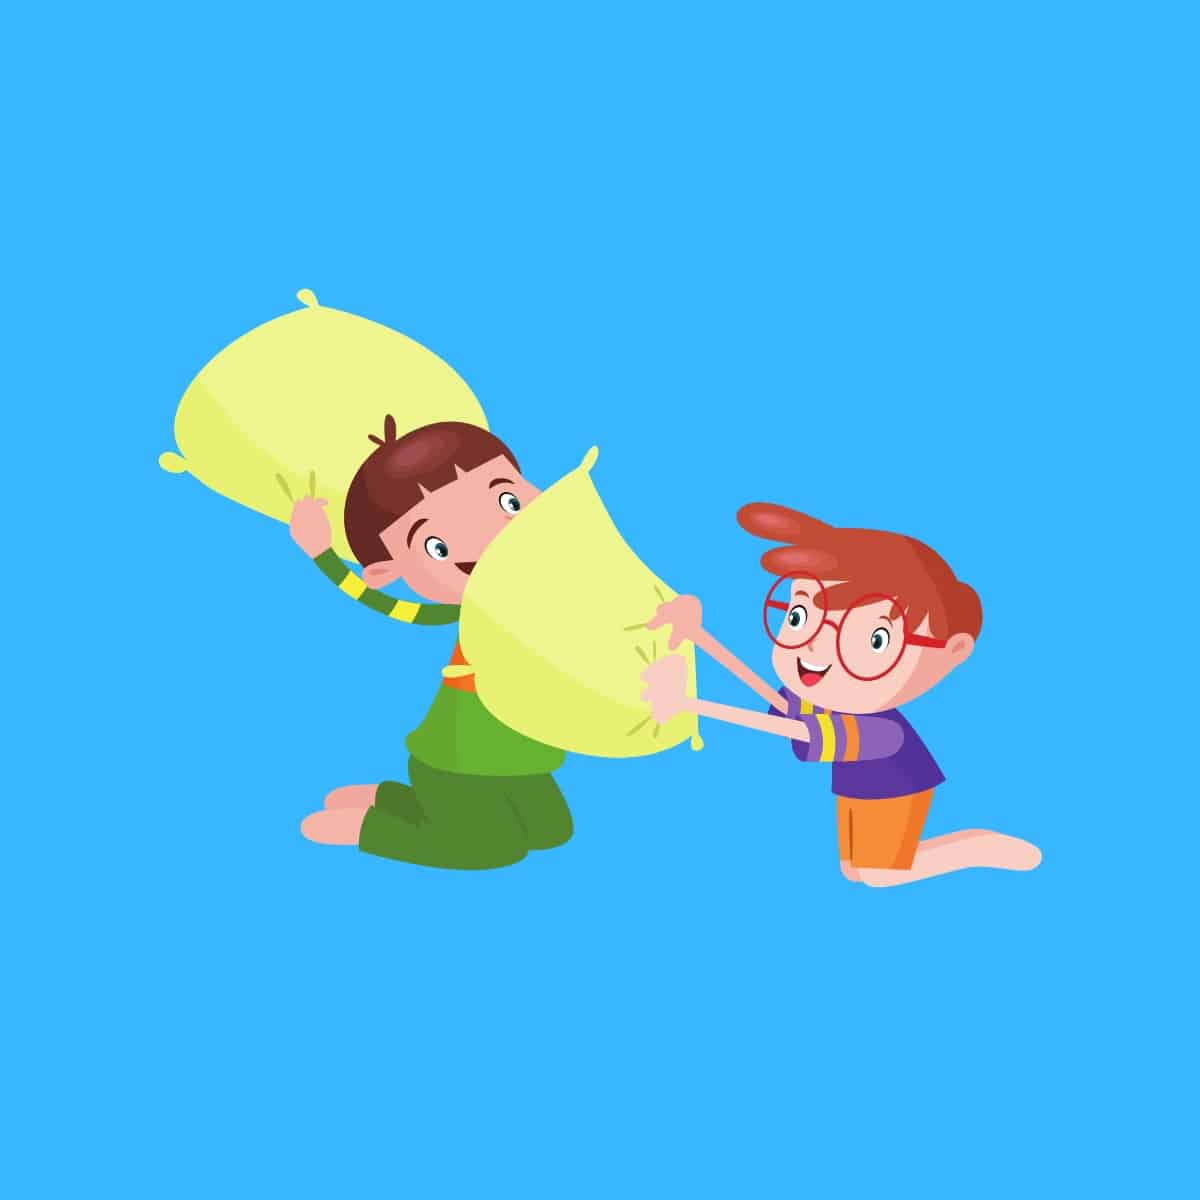 Cartoon graphic of two boys having a pillow fight on a blue background.